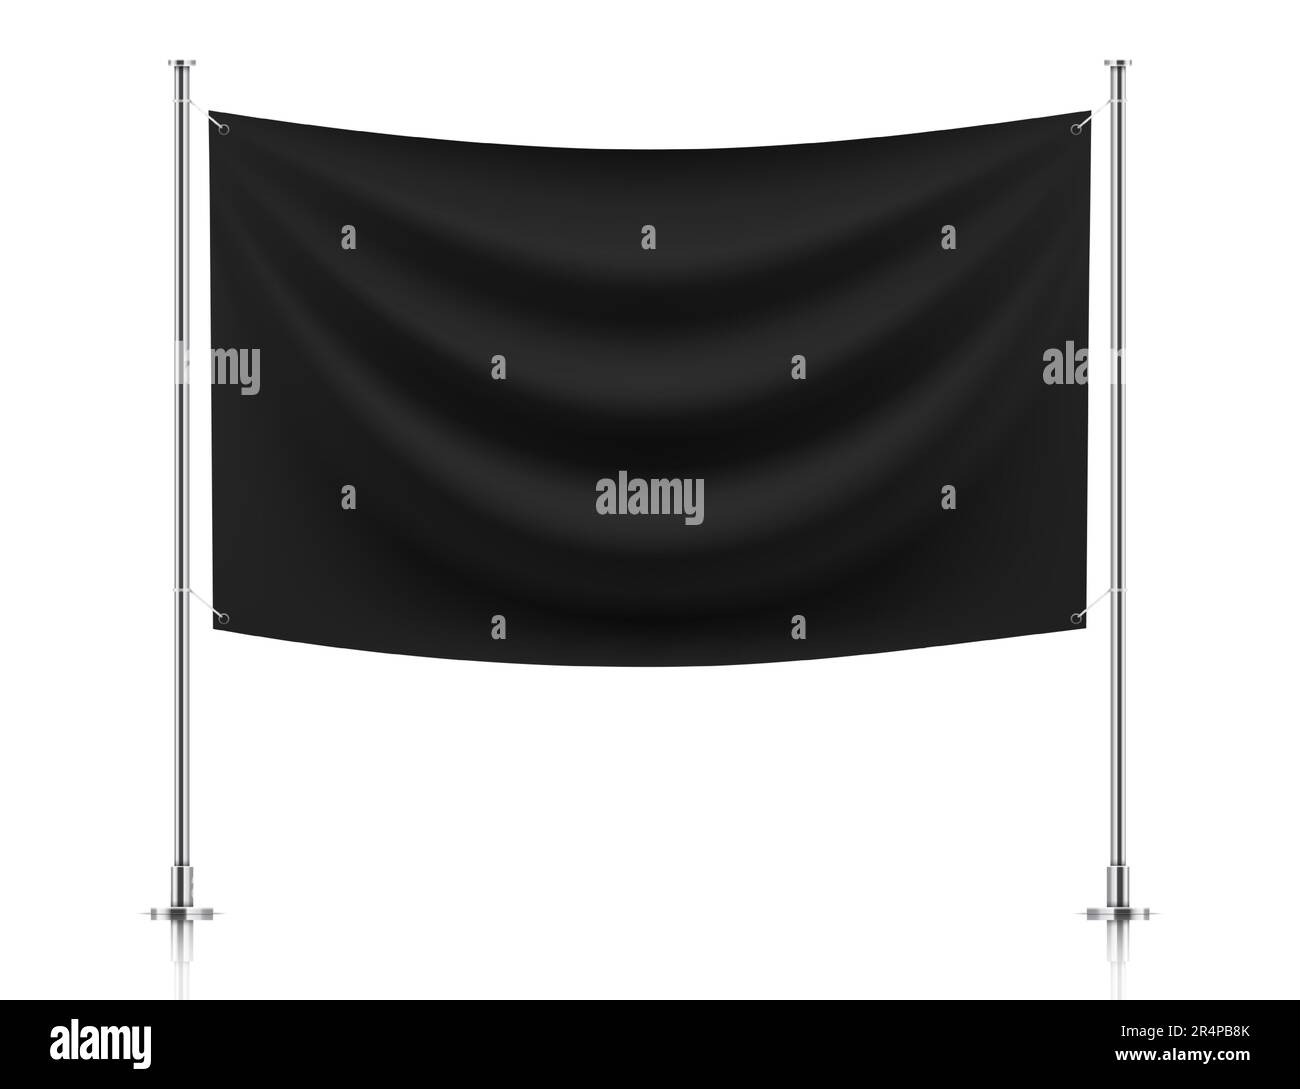 Black fabric banner flag hanging on poles, isolated on white background. Textile horizontal banner realistic mockup. Stock Vector